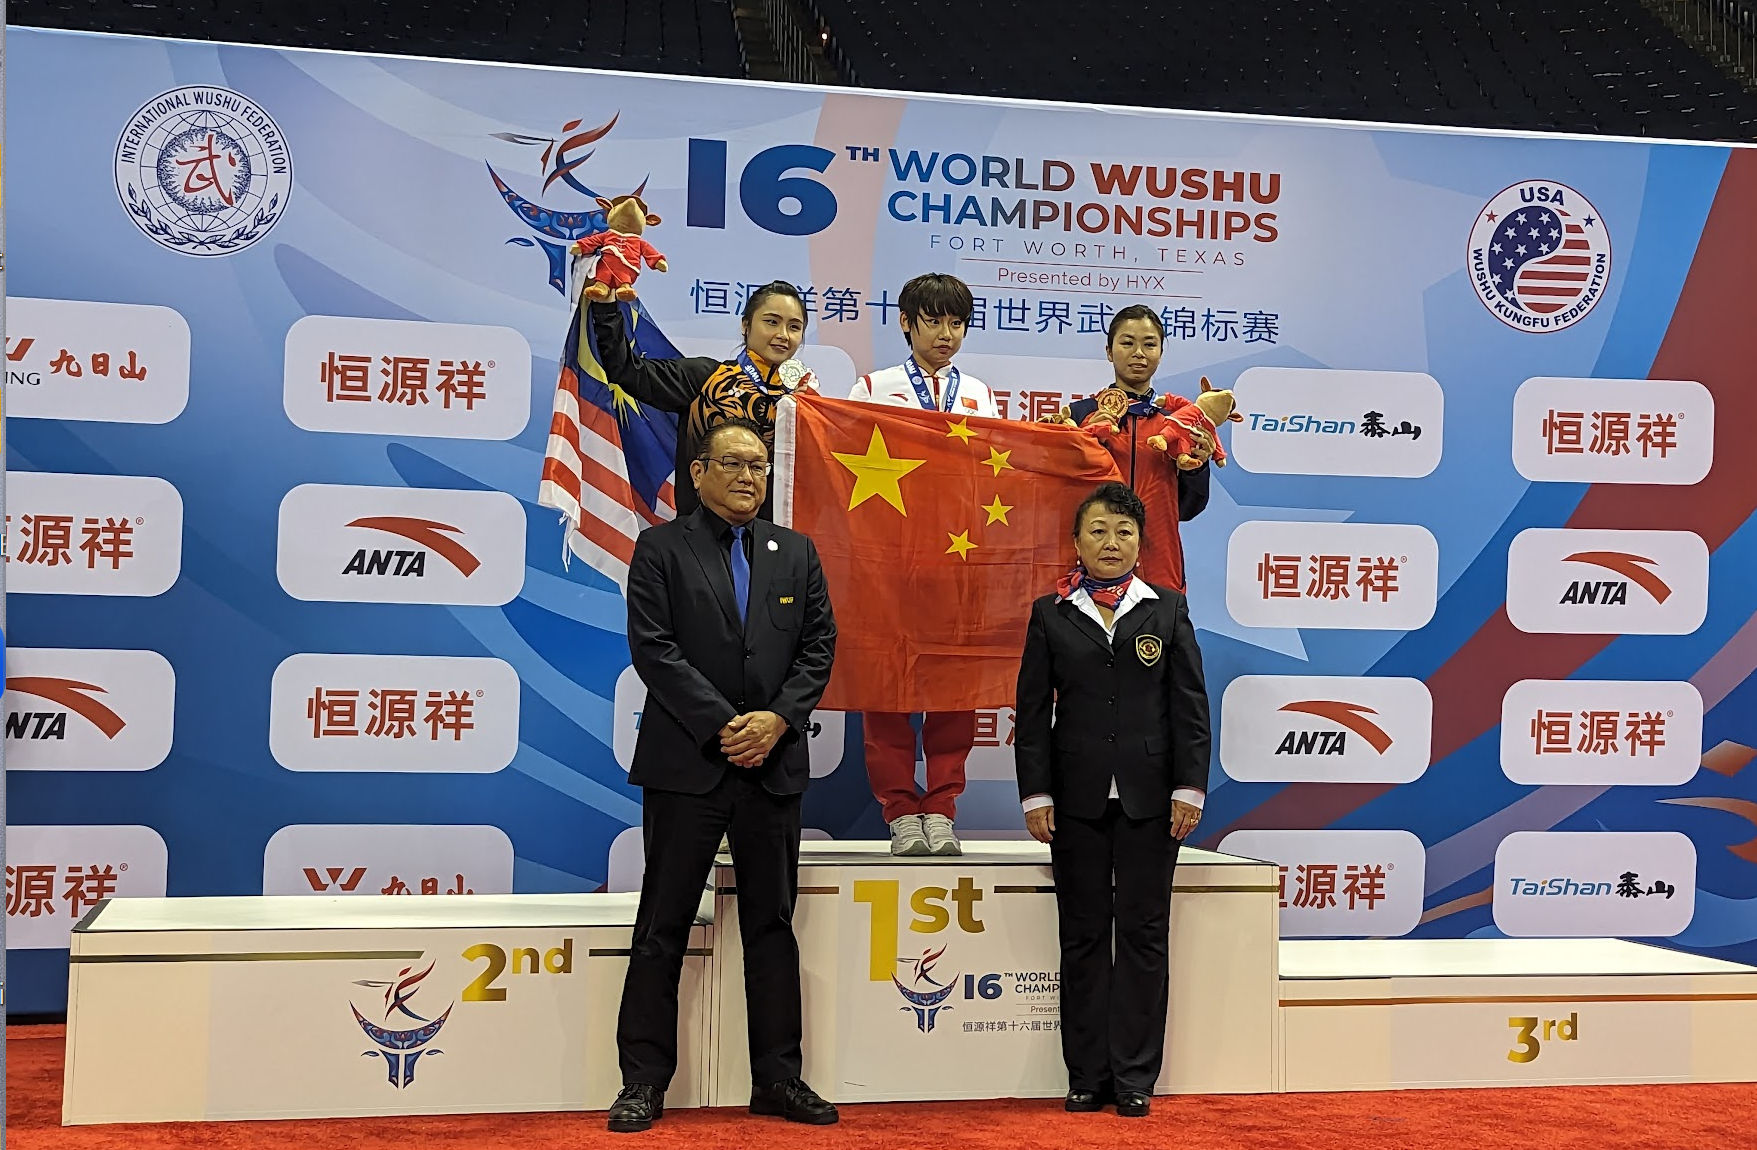 China’s Zhang Qingchun at the awards ceremony following his win in the men’s Qiangshu competition.  Malaysia’s Wong Weng Son took silver and Indonesia’s Muhammad Daffa Golden Boy won bronze. 